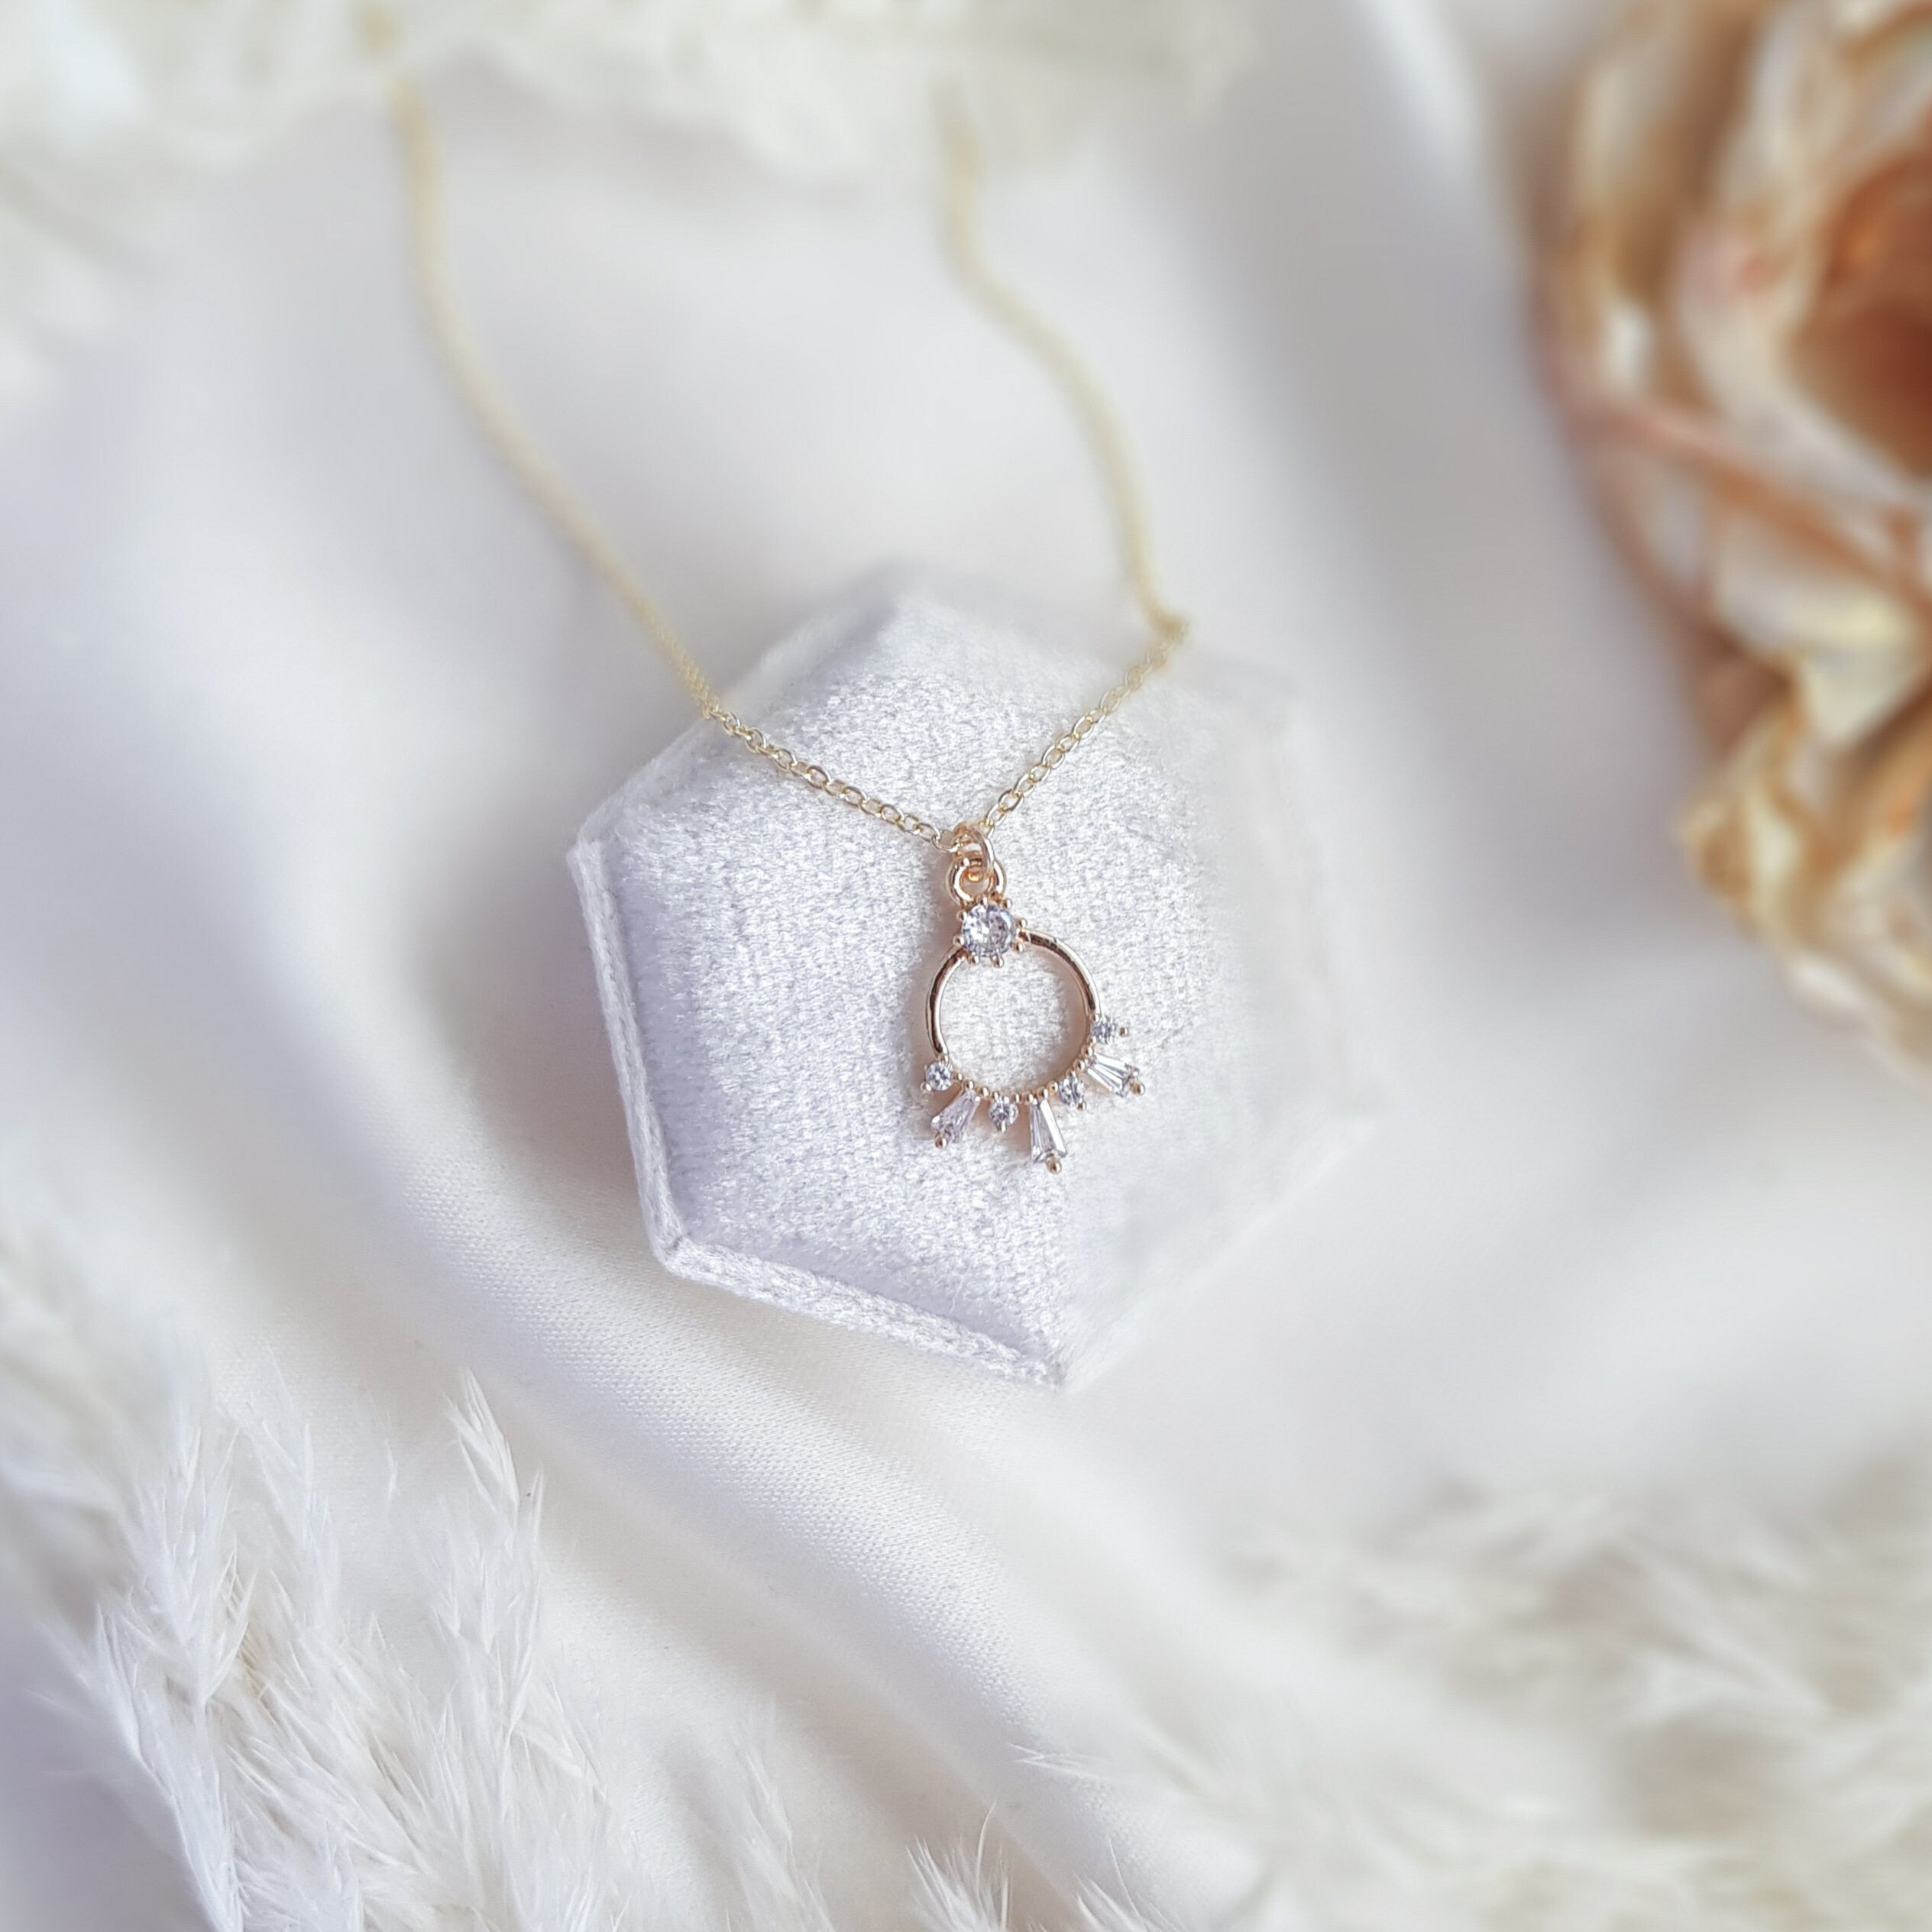 Gold zirconia crystal bridal necklace, Boho wedding necklace, Dainty minimalist necklace, Crystal wedding jewellery, Jewellery for brides